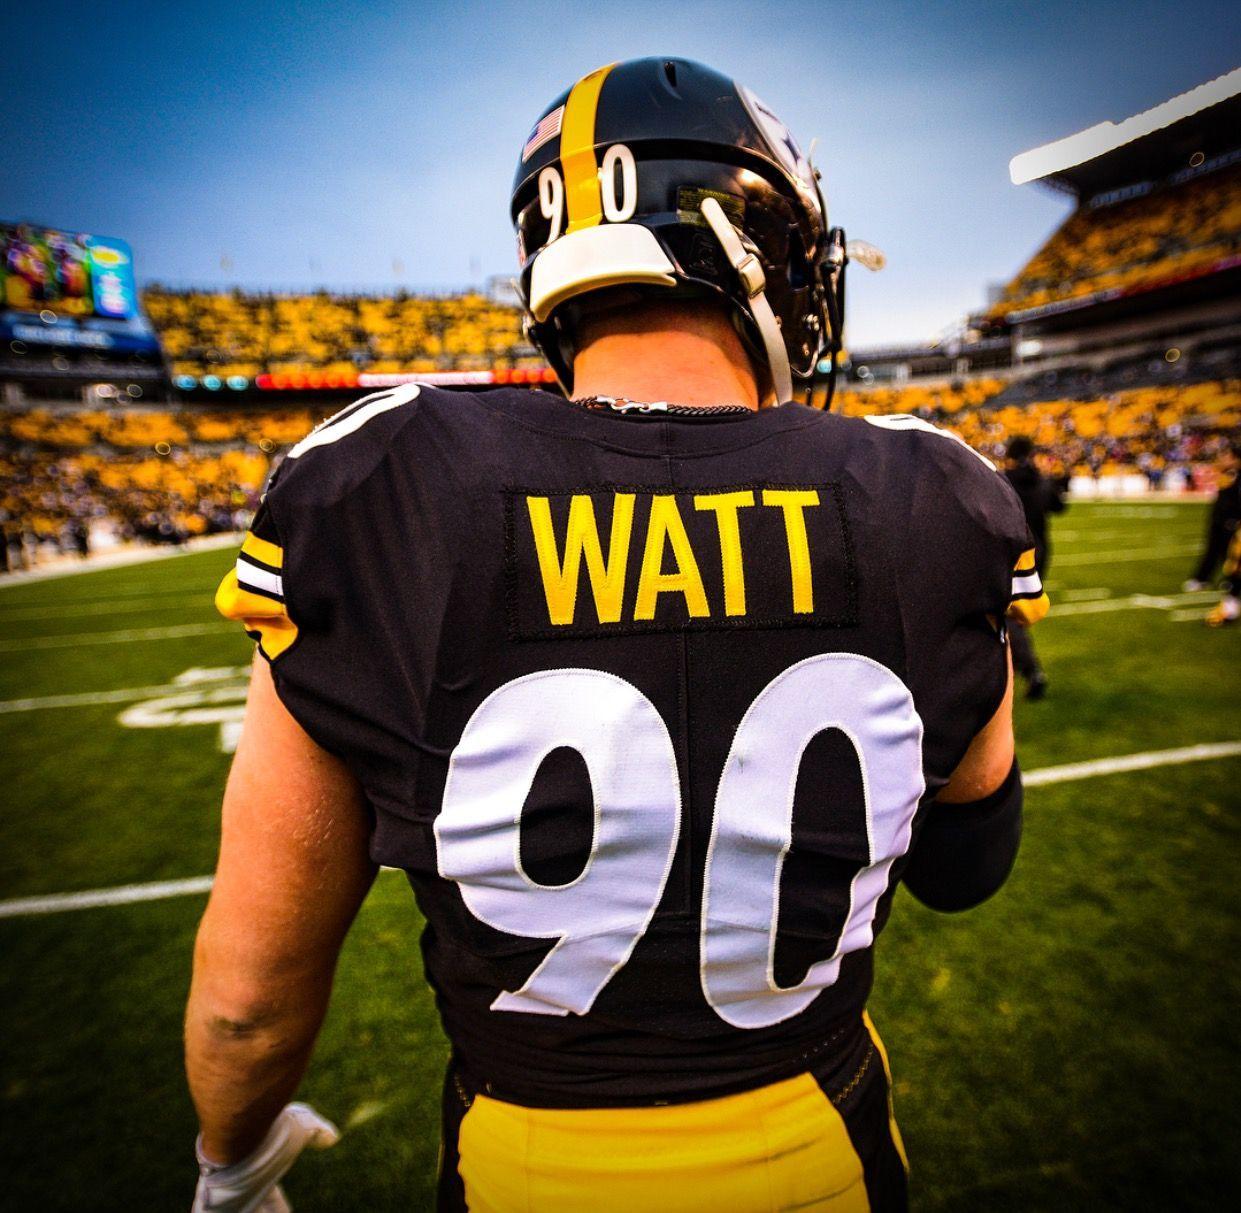 Pittsburgh Steelers  TJ Watt is the first player in SteelersHistory  with 140 sacks in multiple seasons   httpbitly3nT0Pdz   httpbitly3nONJOC  Facebook